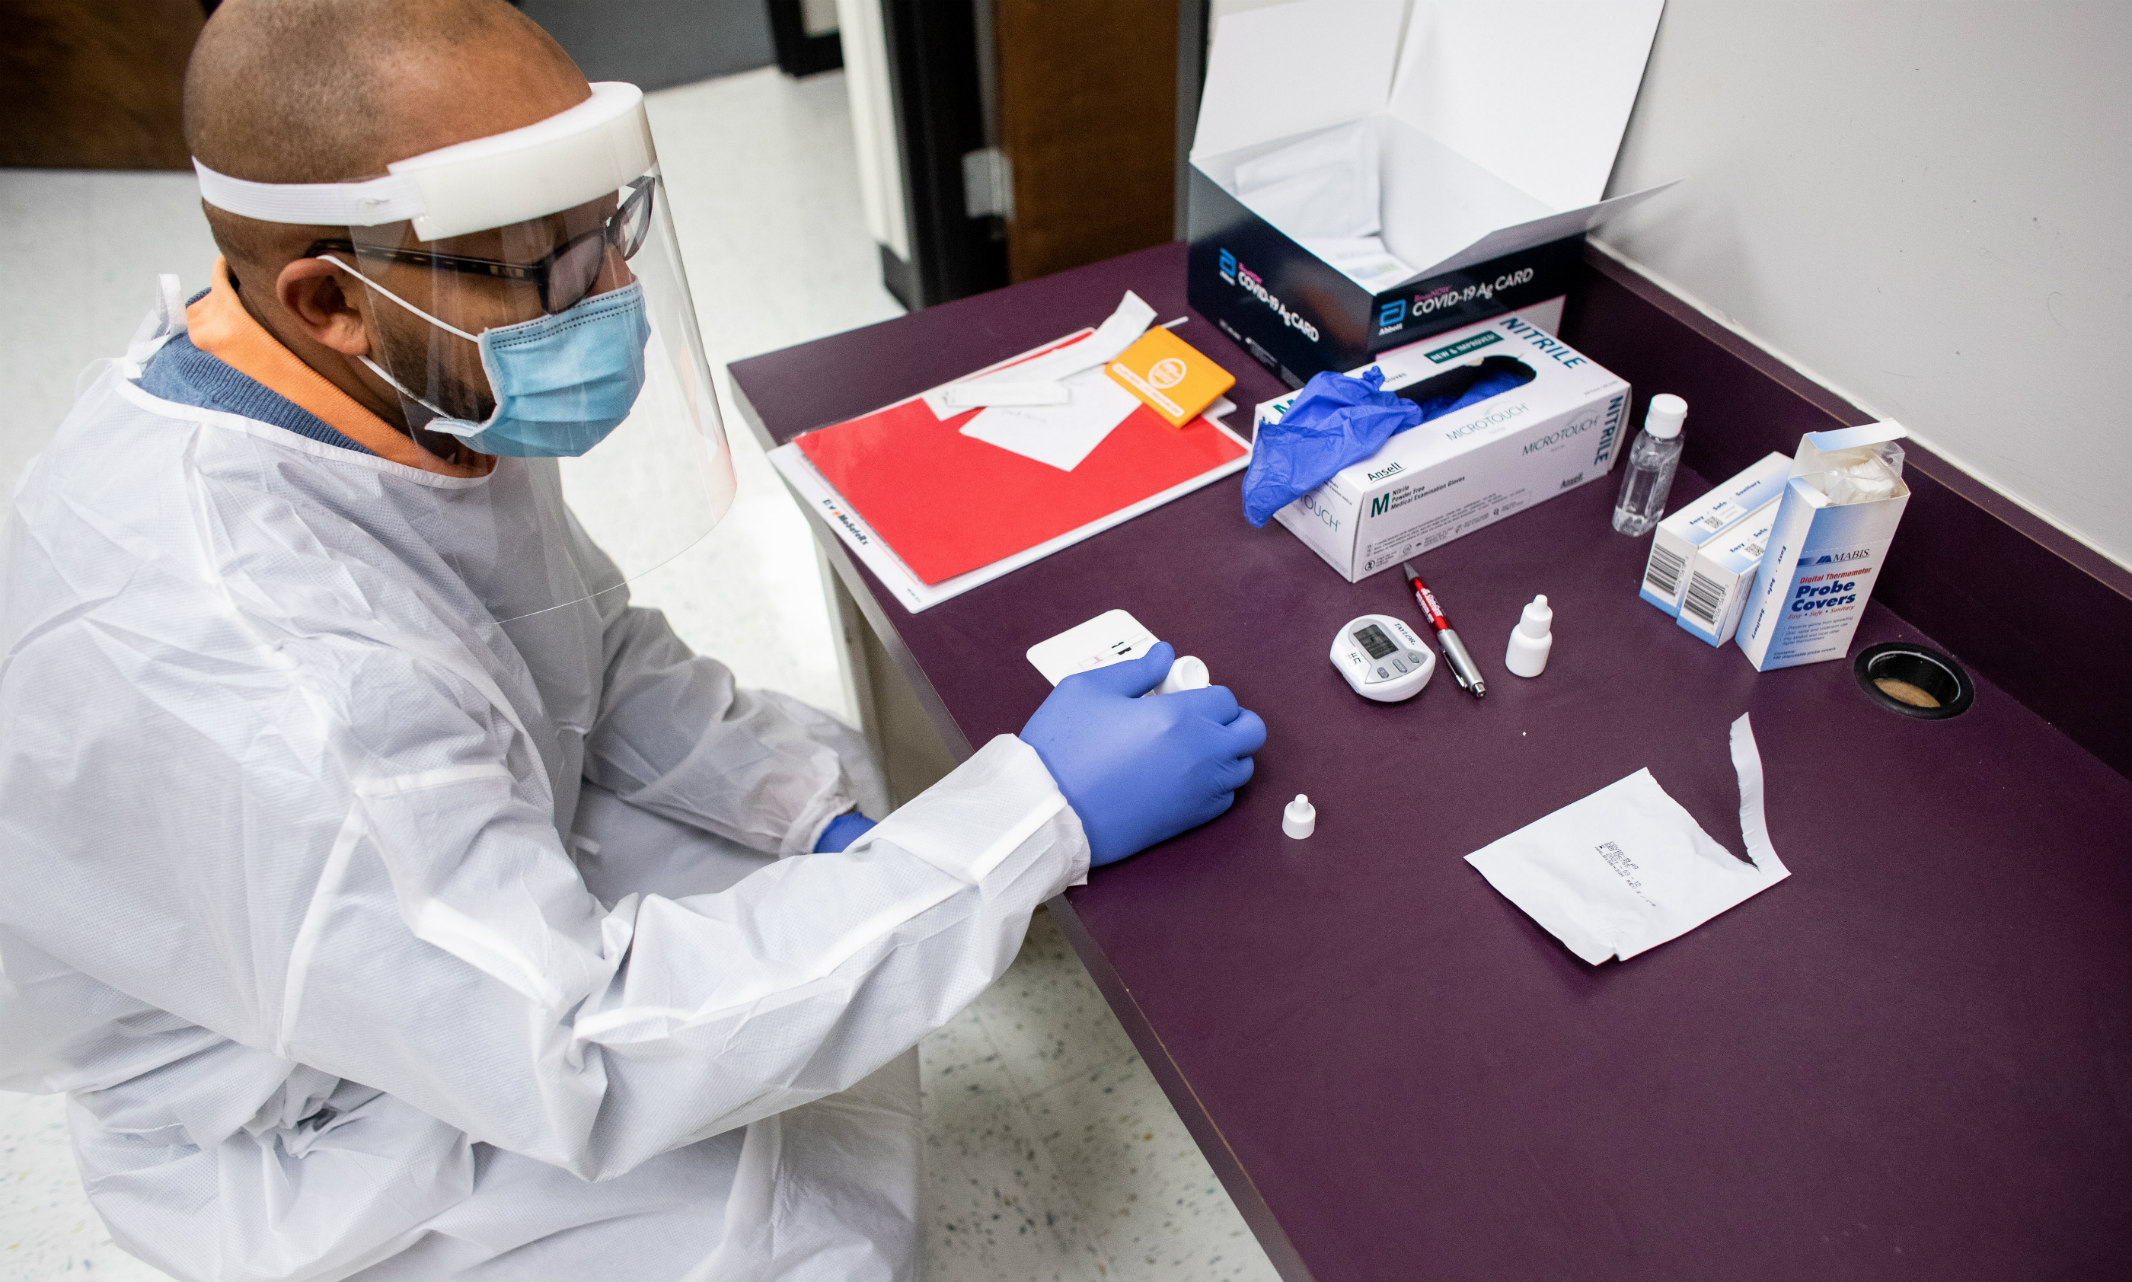 Man in mask and white coat conducting COVID testing in lab.